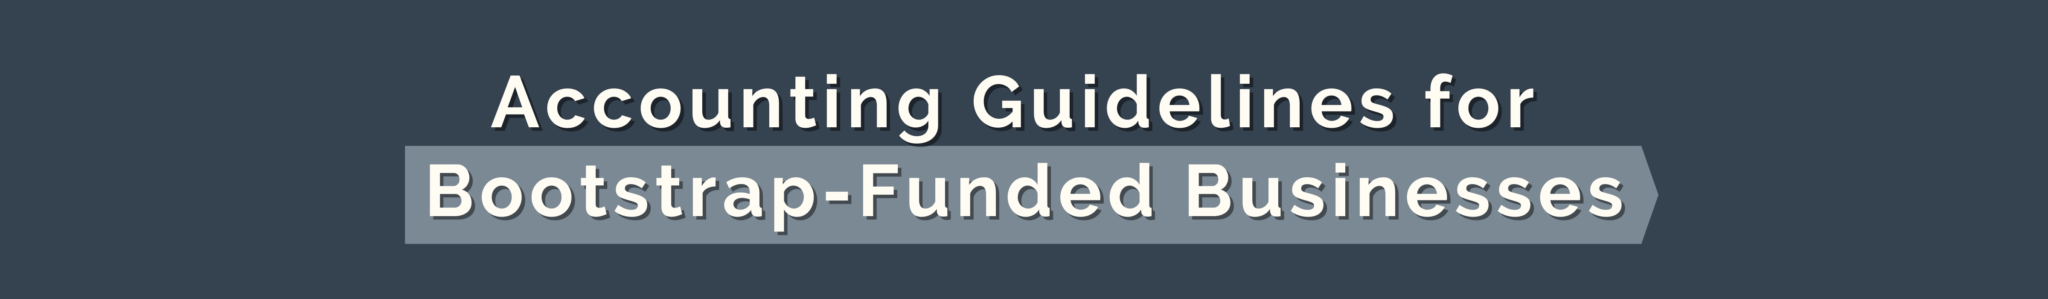 Accounting Guidelines for Bootstrap-Funded Businesses